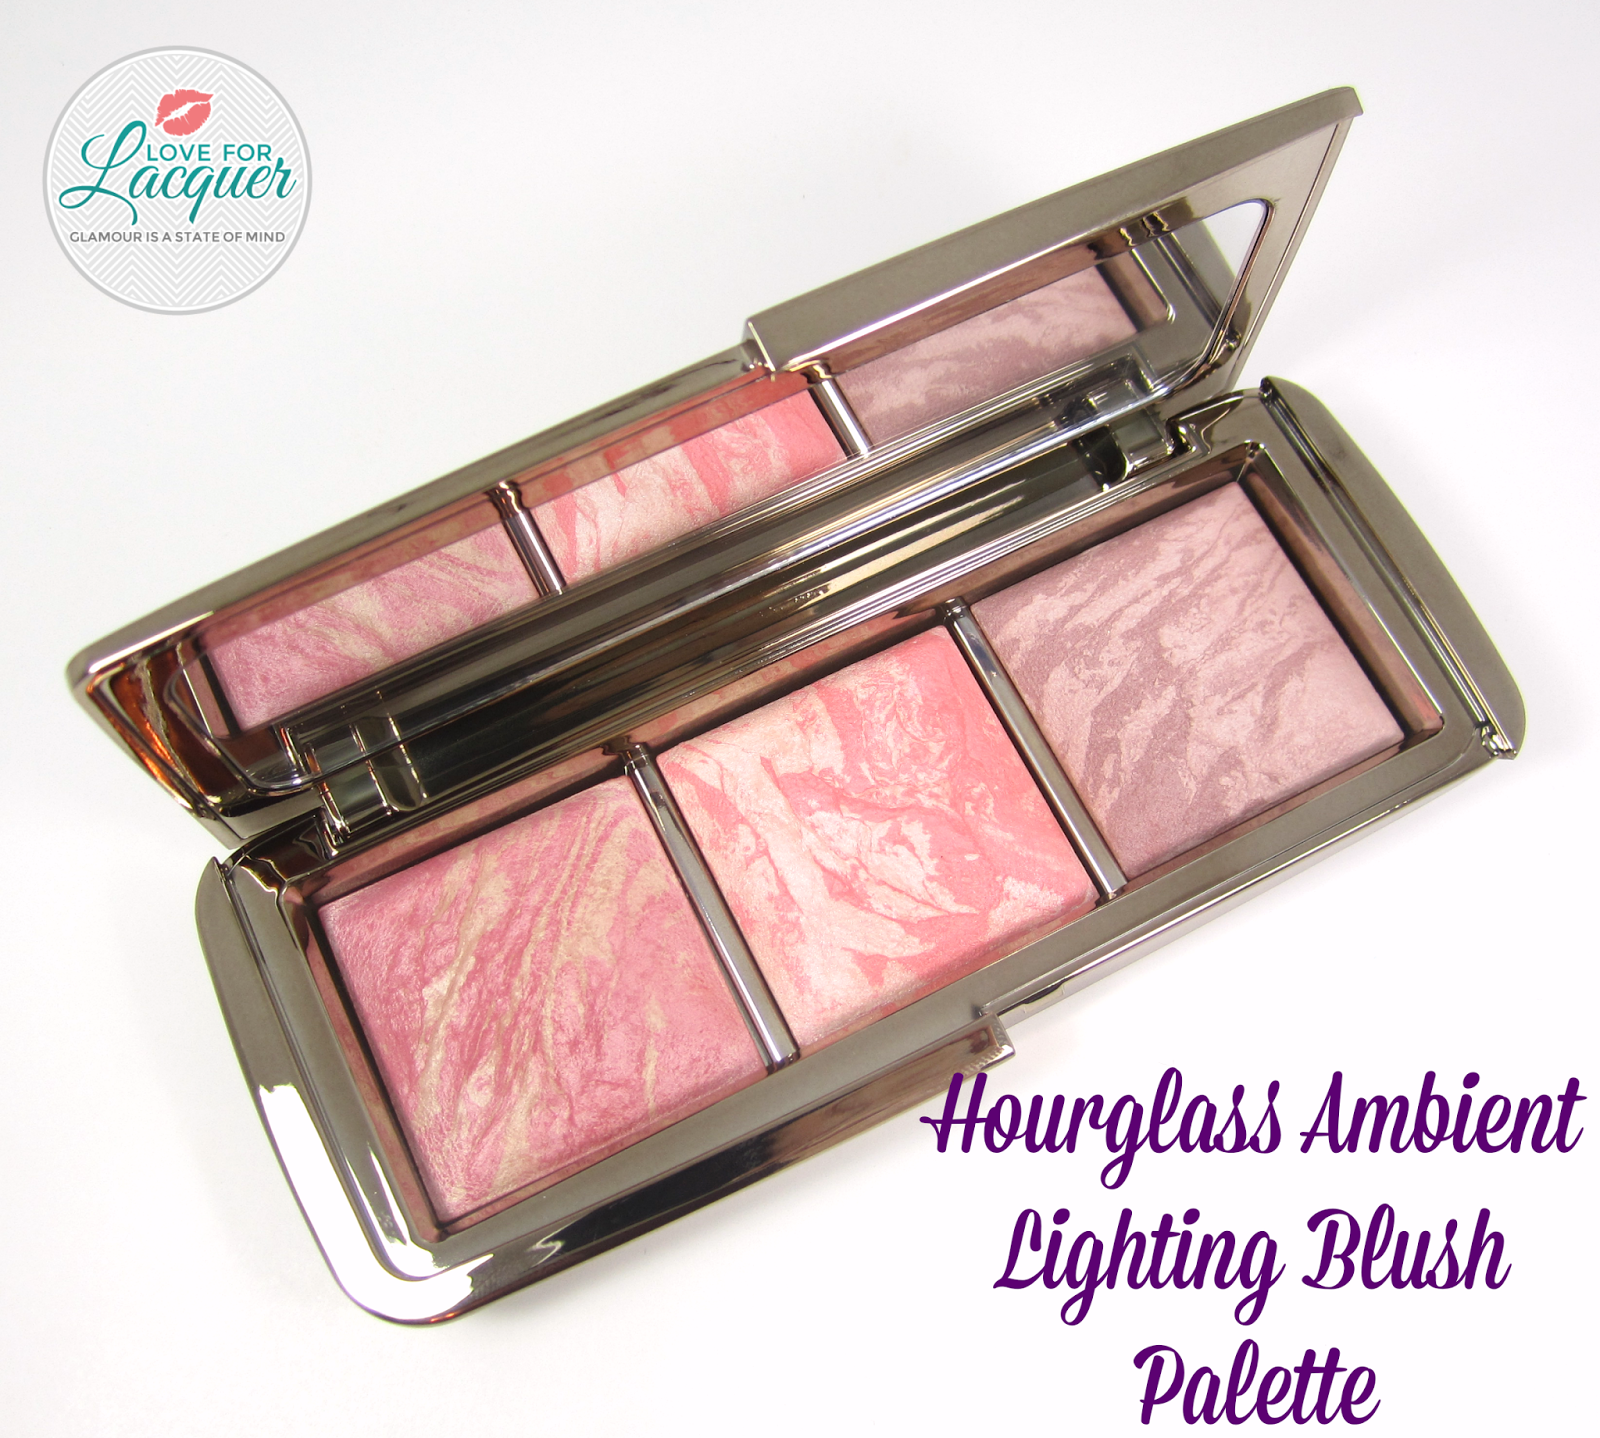 is Premonition kom over Hourglass Ambient Lighting Blush Palette - Swatches & Review - Love for  Lacquer